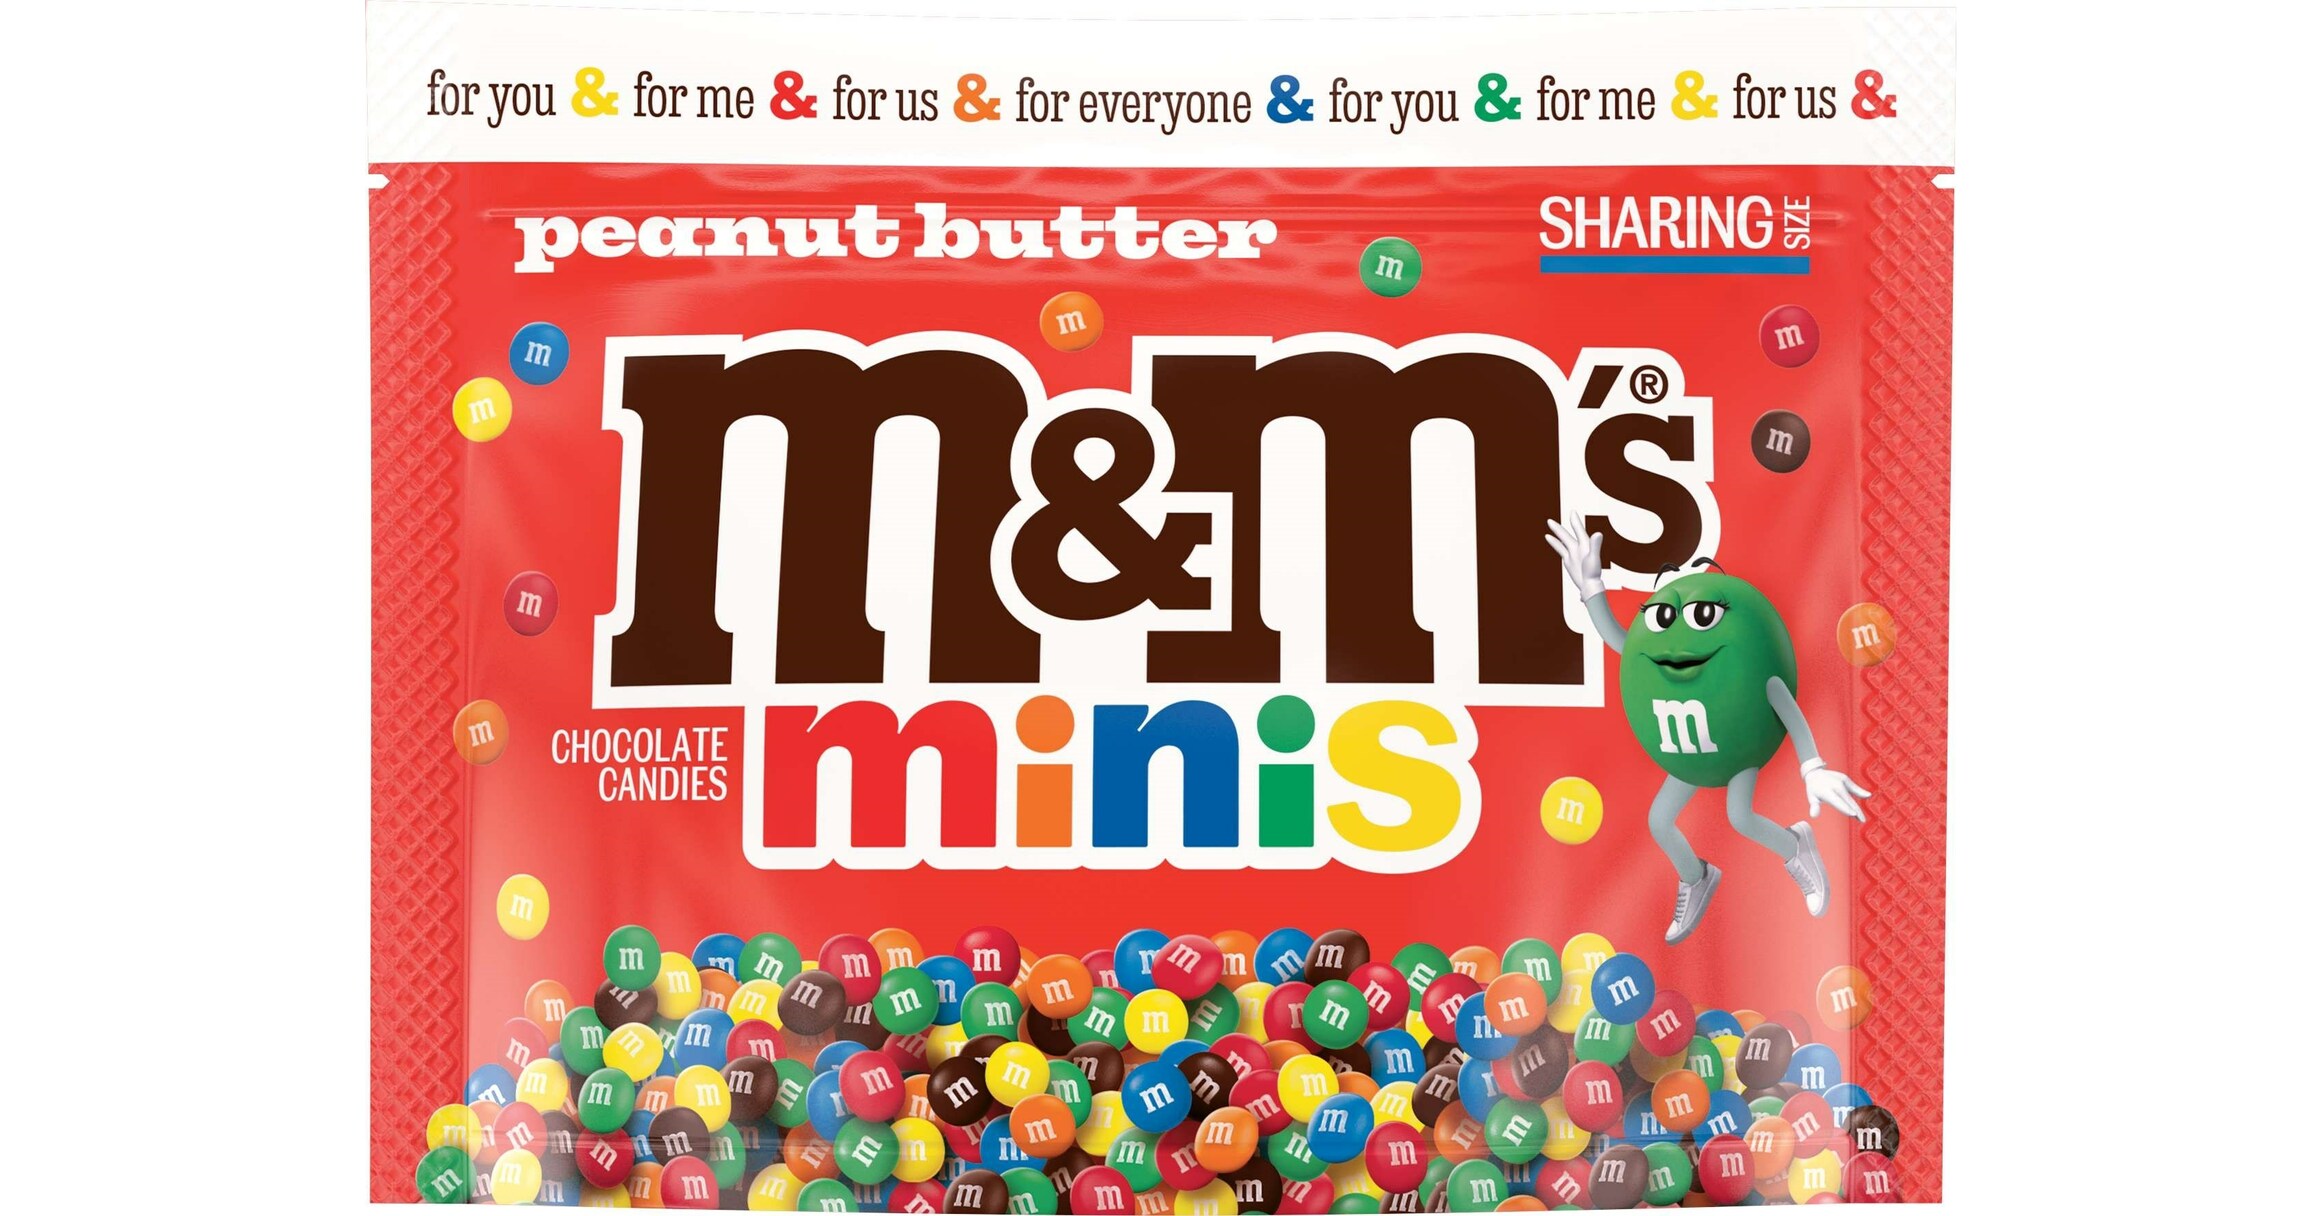 Peanut Butter Minis Are the Newest Innovation from Mars